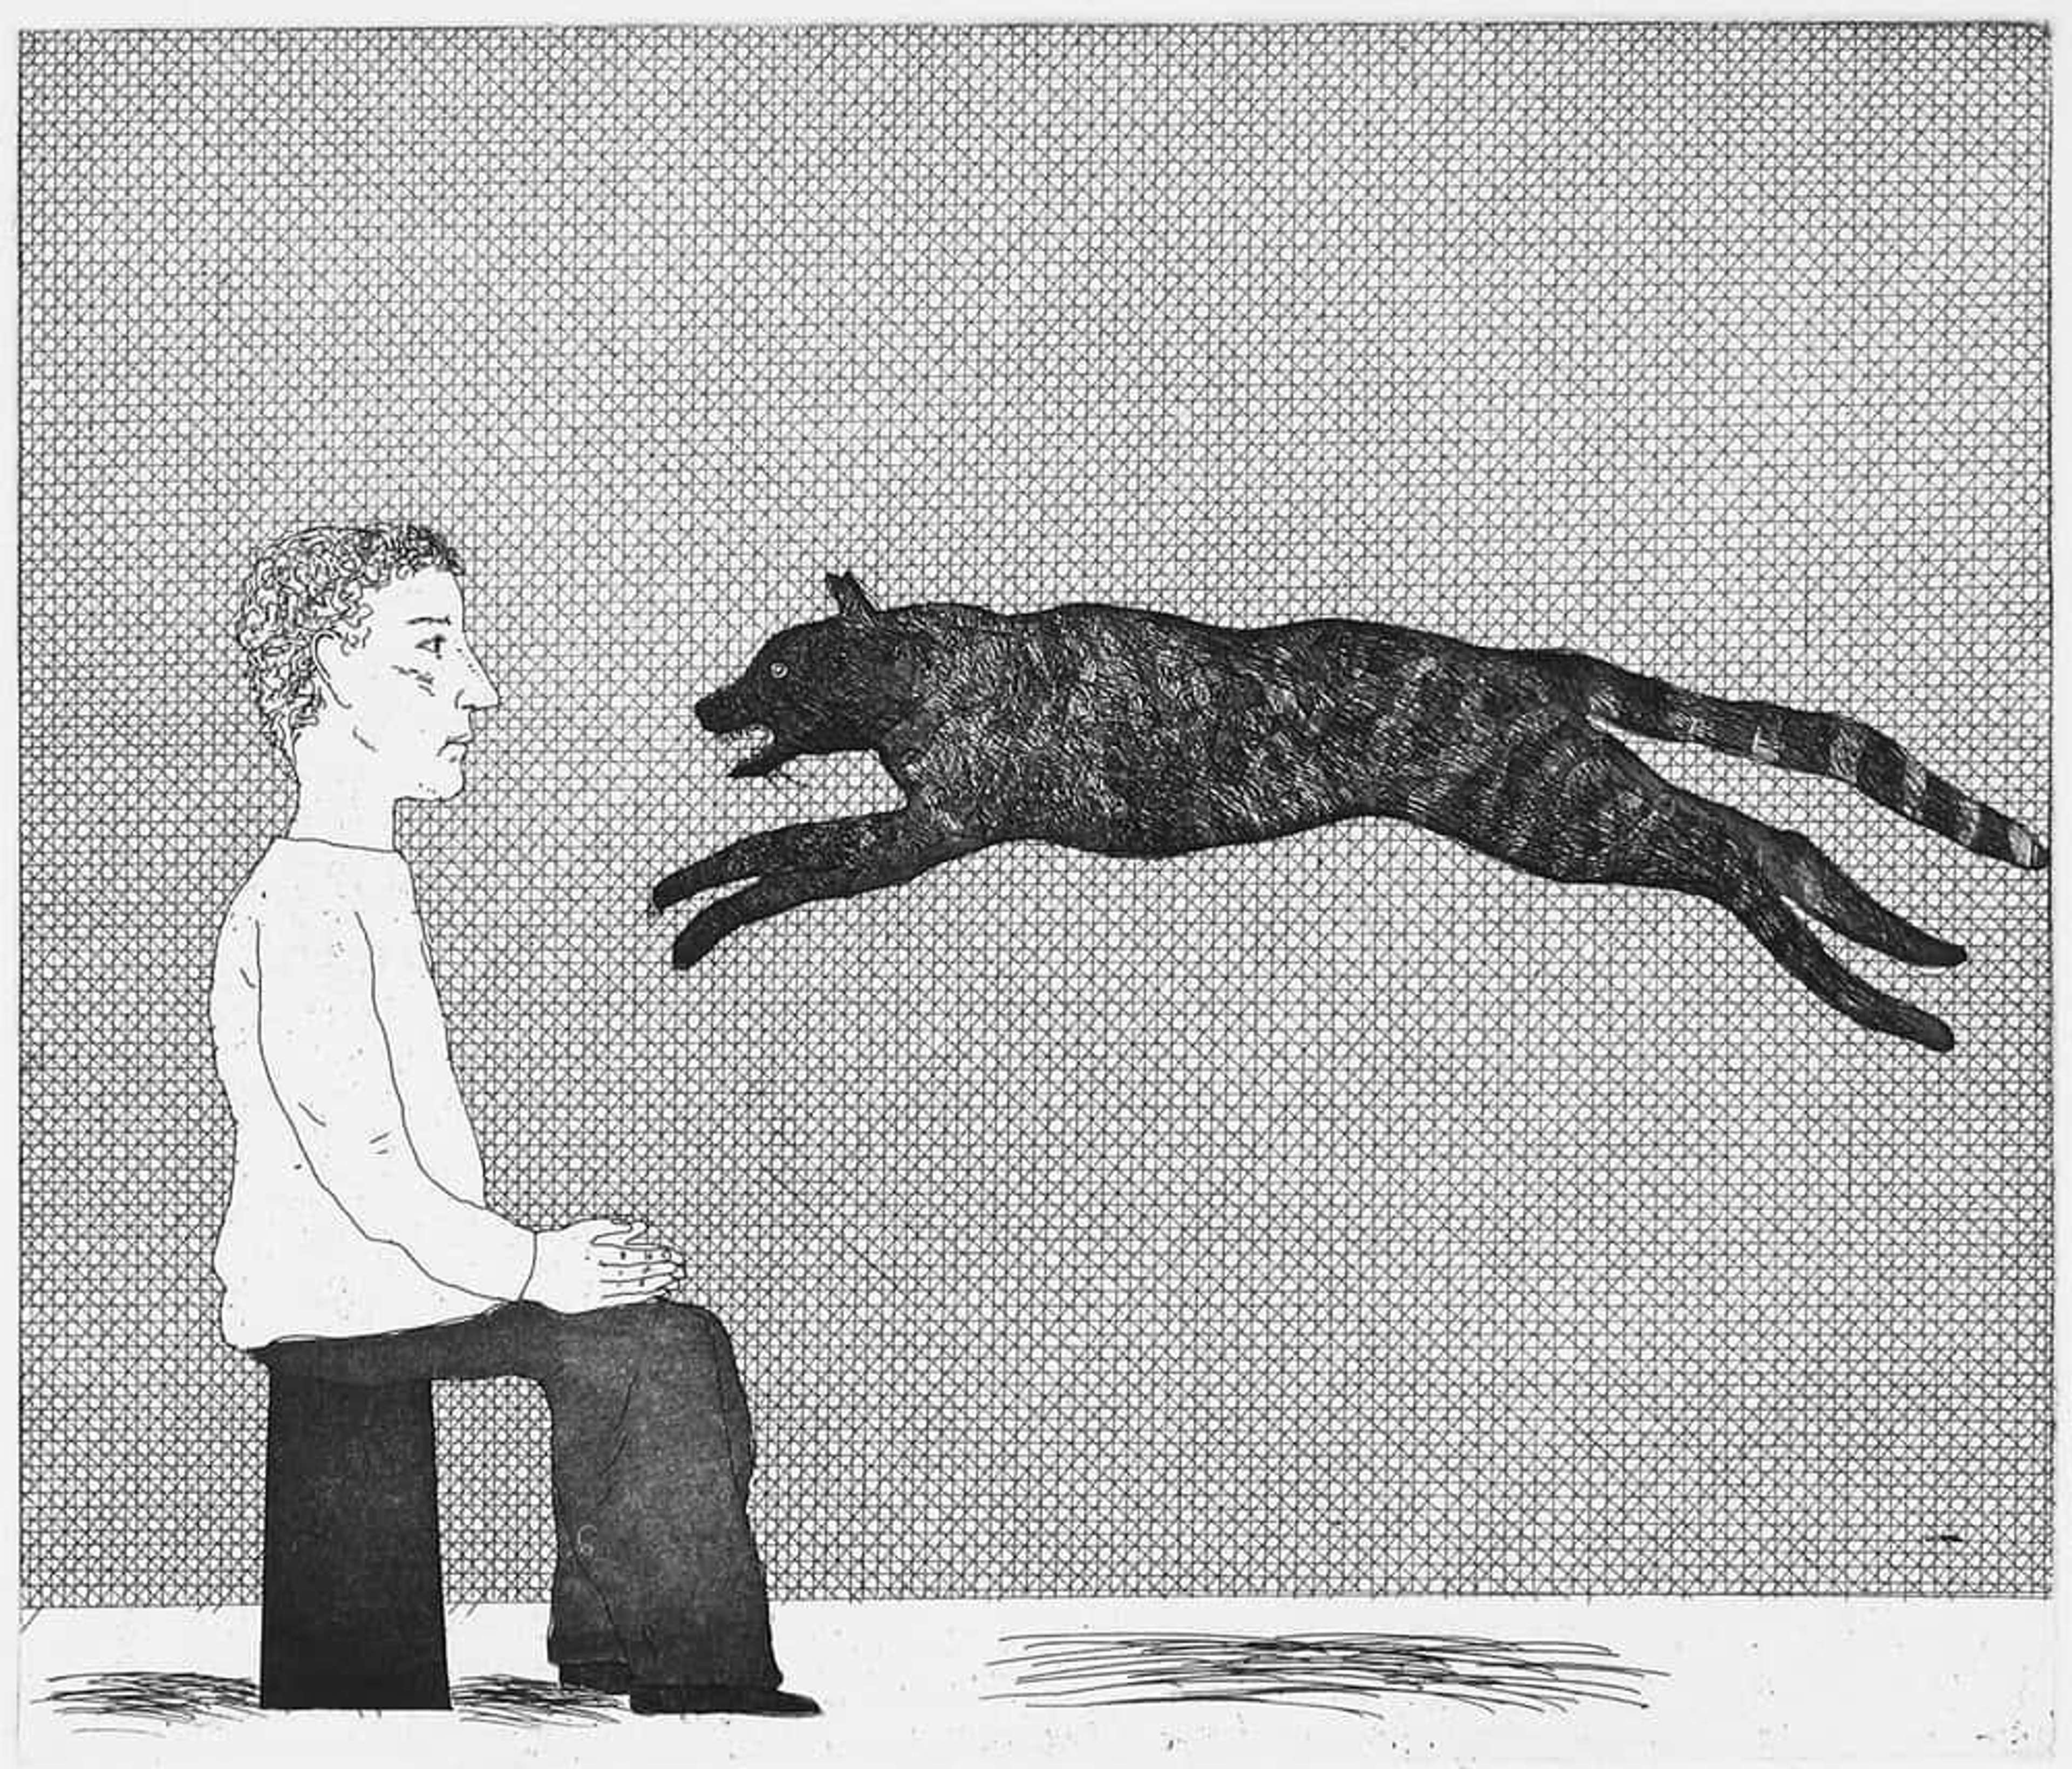 David Hockney’s A Black Cat Leaping. An etching of a black cat leaping towards a man kneeling down.